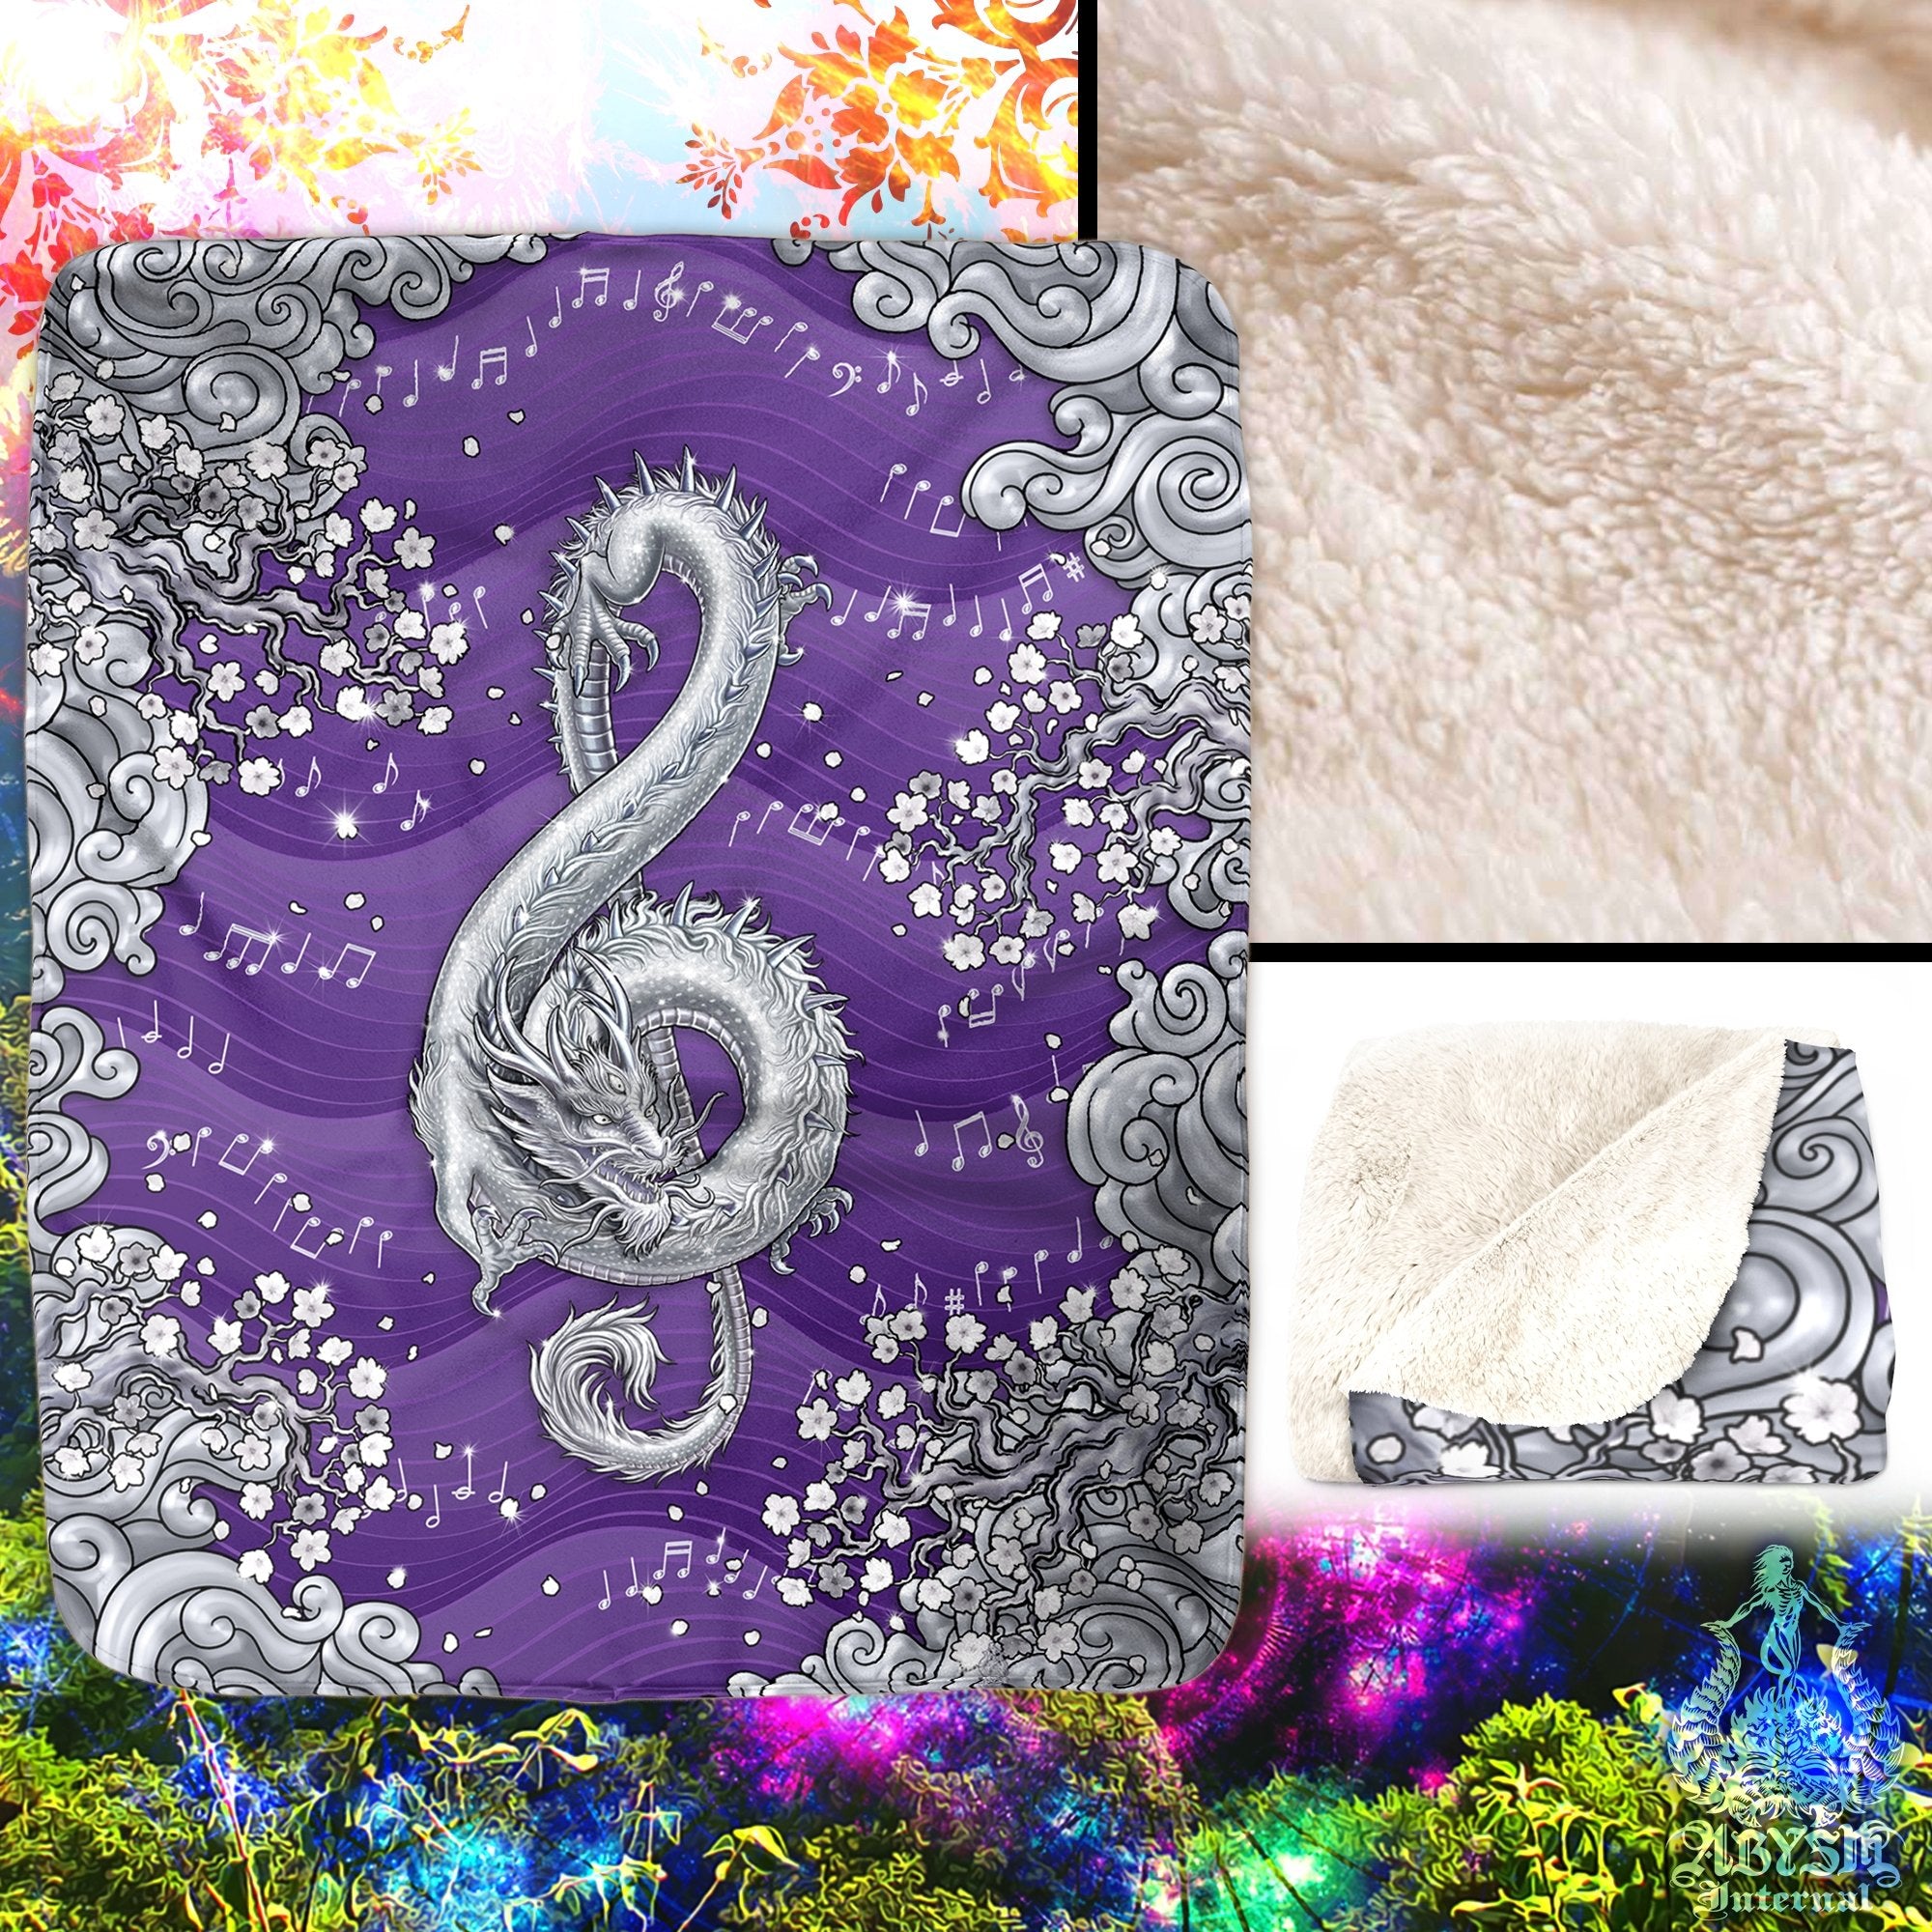 White Dragon Throw Fleece Blanket, Treble Clef, Music Art, Asian Decor, Eclectic and Funky Gift - Purple - Abysm Internal